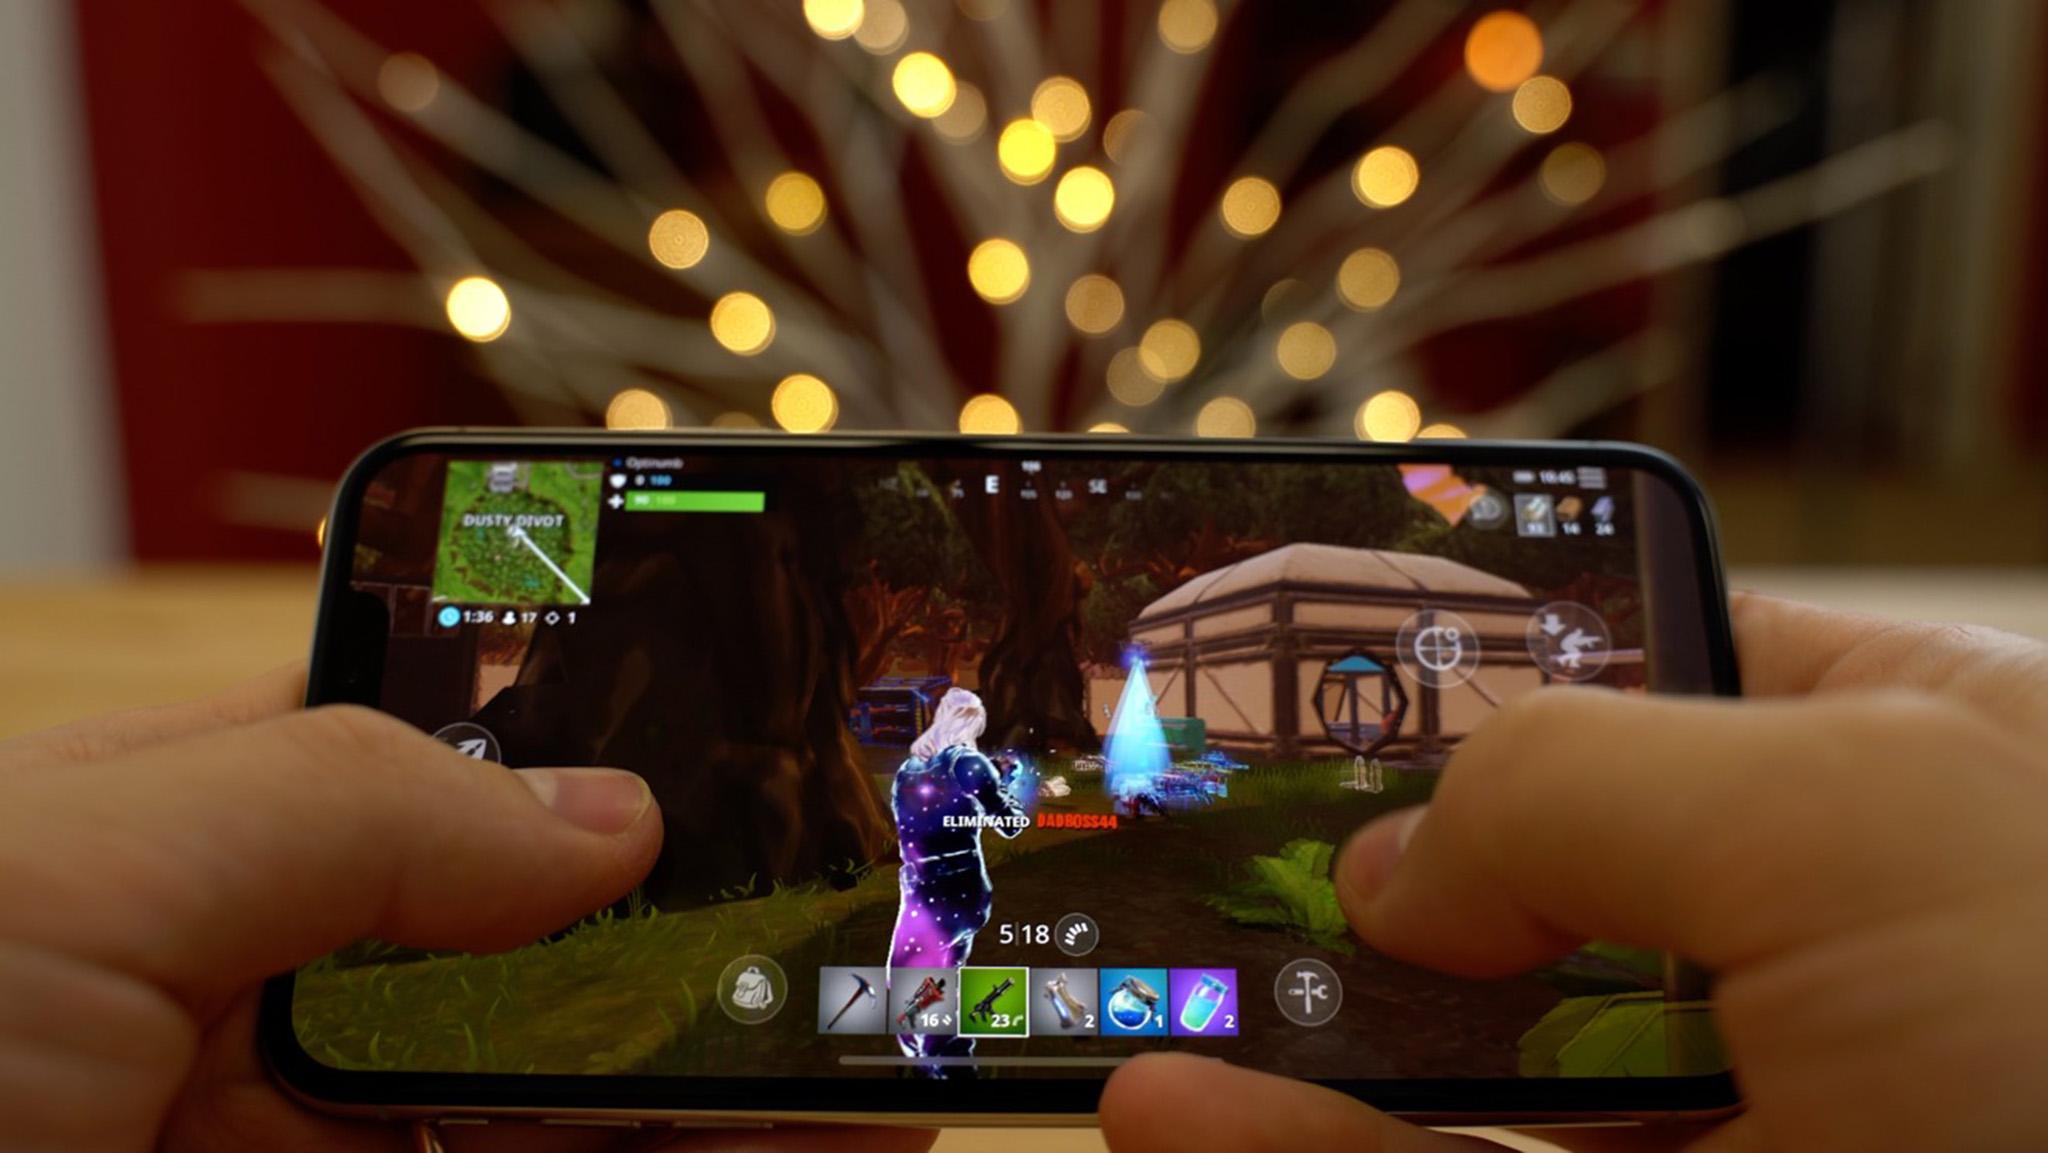 Fortnite fans who play the battle royale on iOS mobile devices are set to miss Season 4.